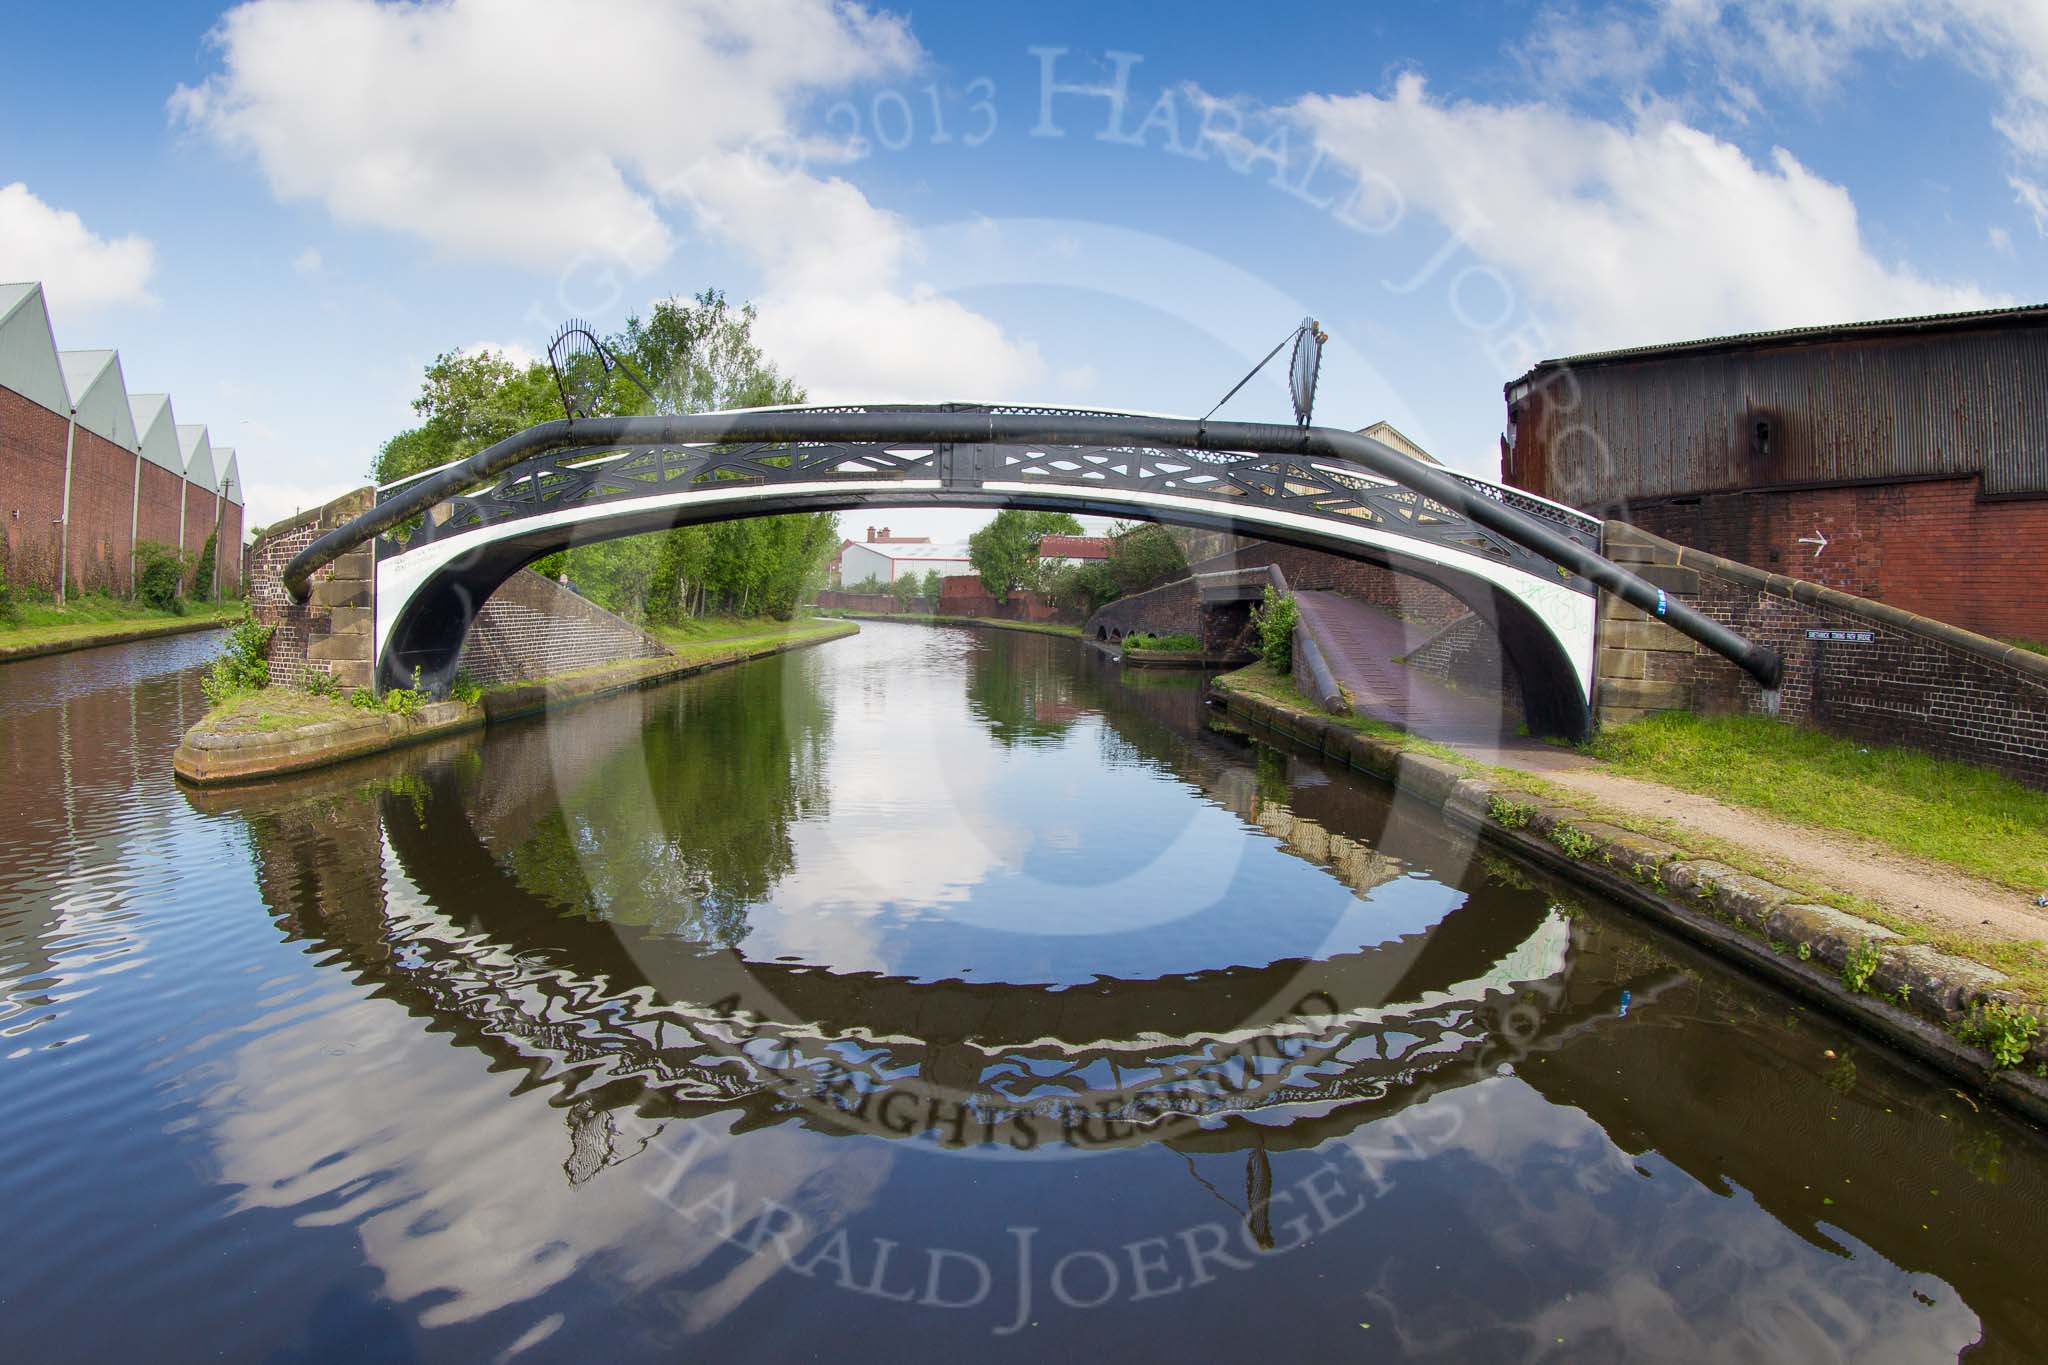 BCN Marathon Challenge 2013: Smethwick Junction, on the left the New Main Line, on the right the Old Main Line with the Smethwick Towing Path Bridge, another Horseley Iron Works cast iron bridge. Just behind the bridge, on the right, a factory bridge over a former canal basin that served Woodford Iron Works..
Birmingham Canal Navigation,


United Kingdom,
on 25 May 2013 at 08:53, image #87